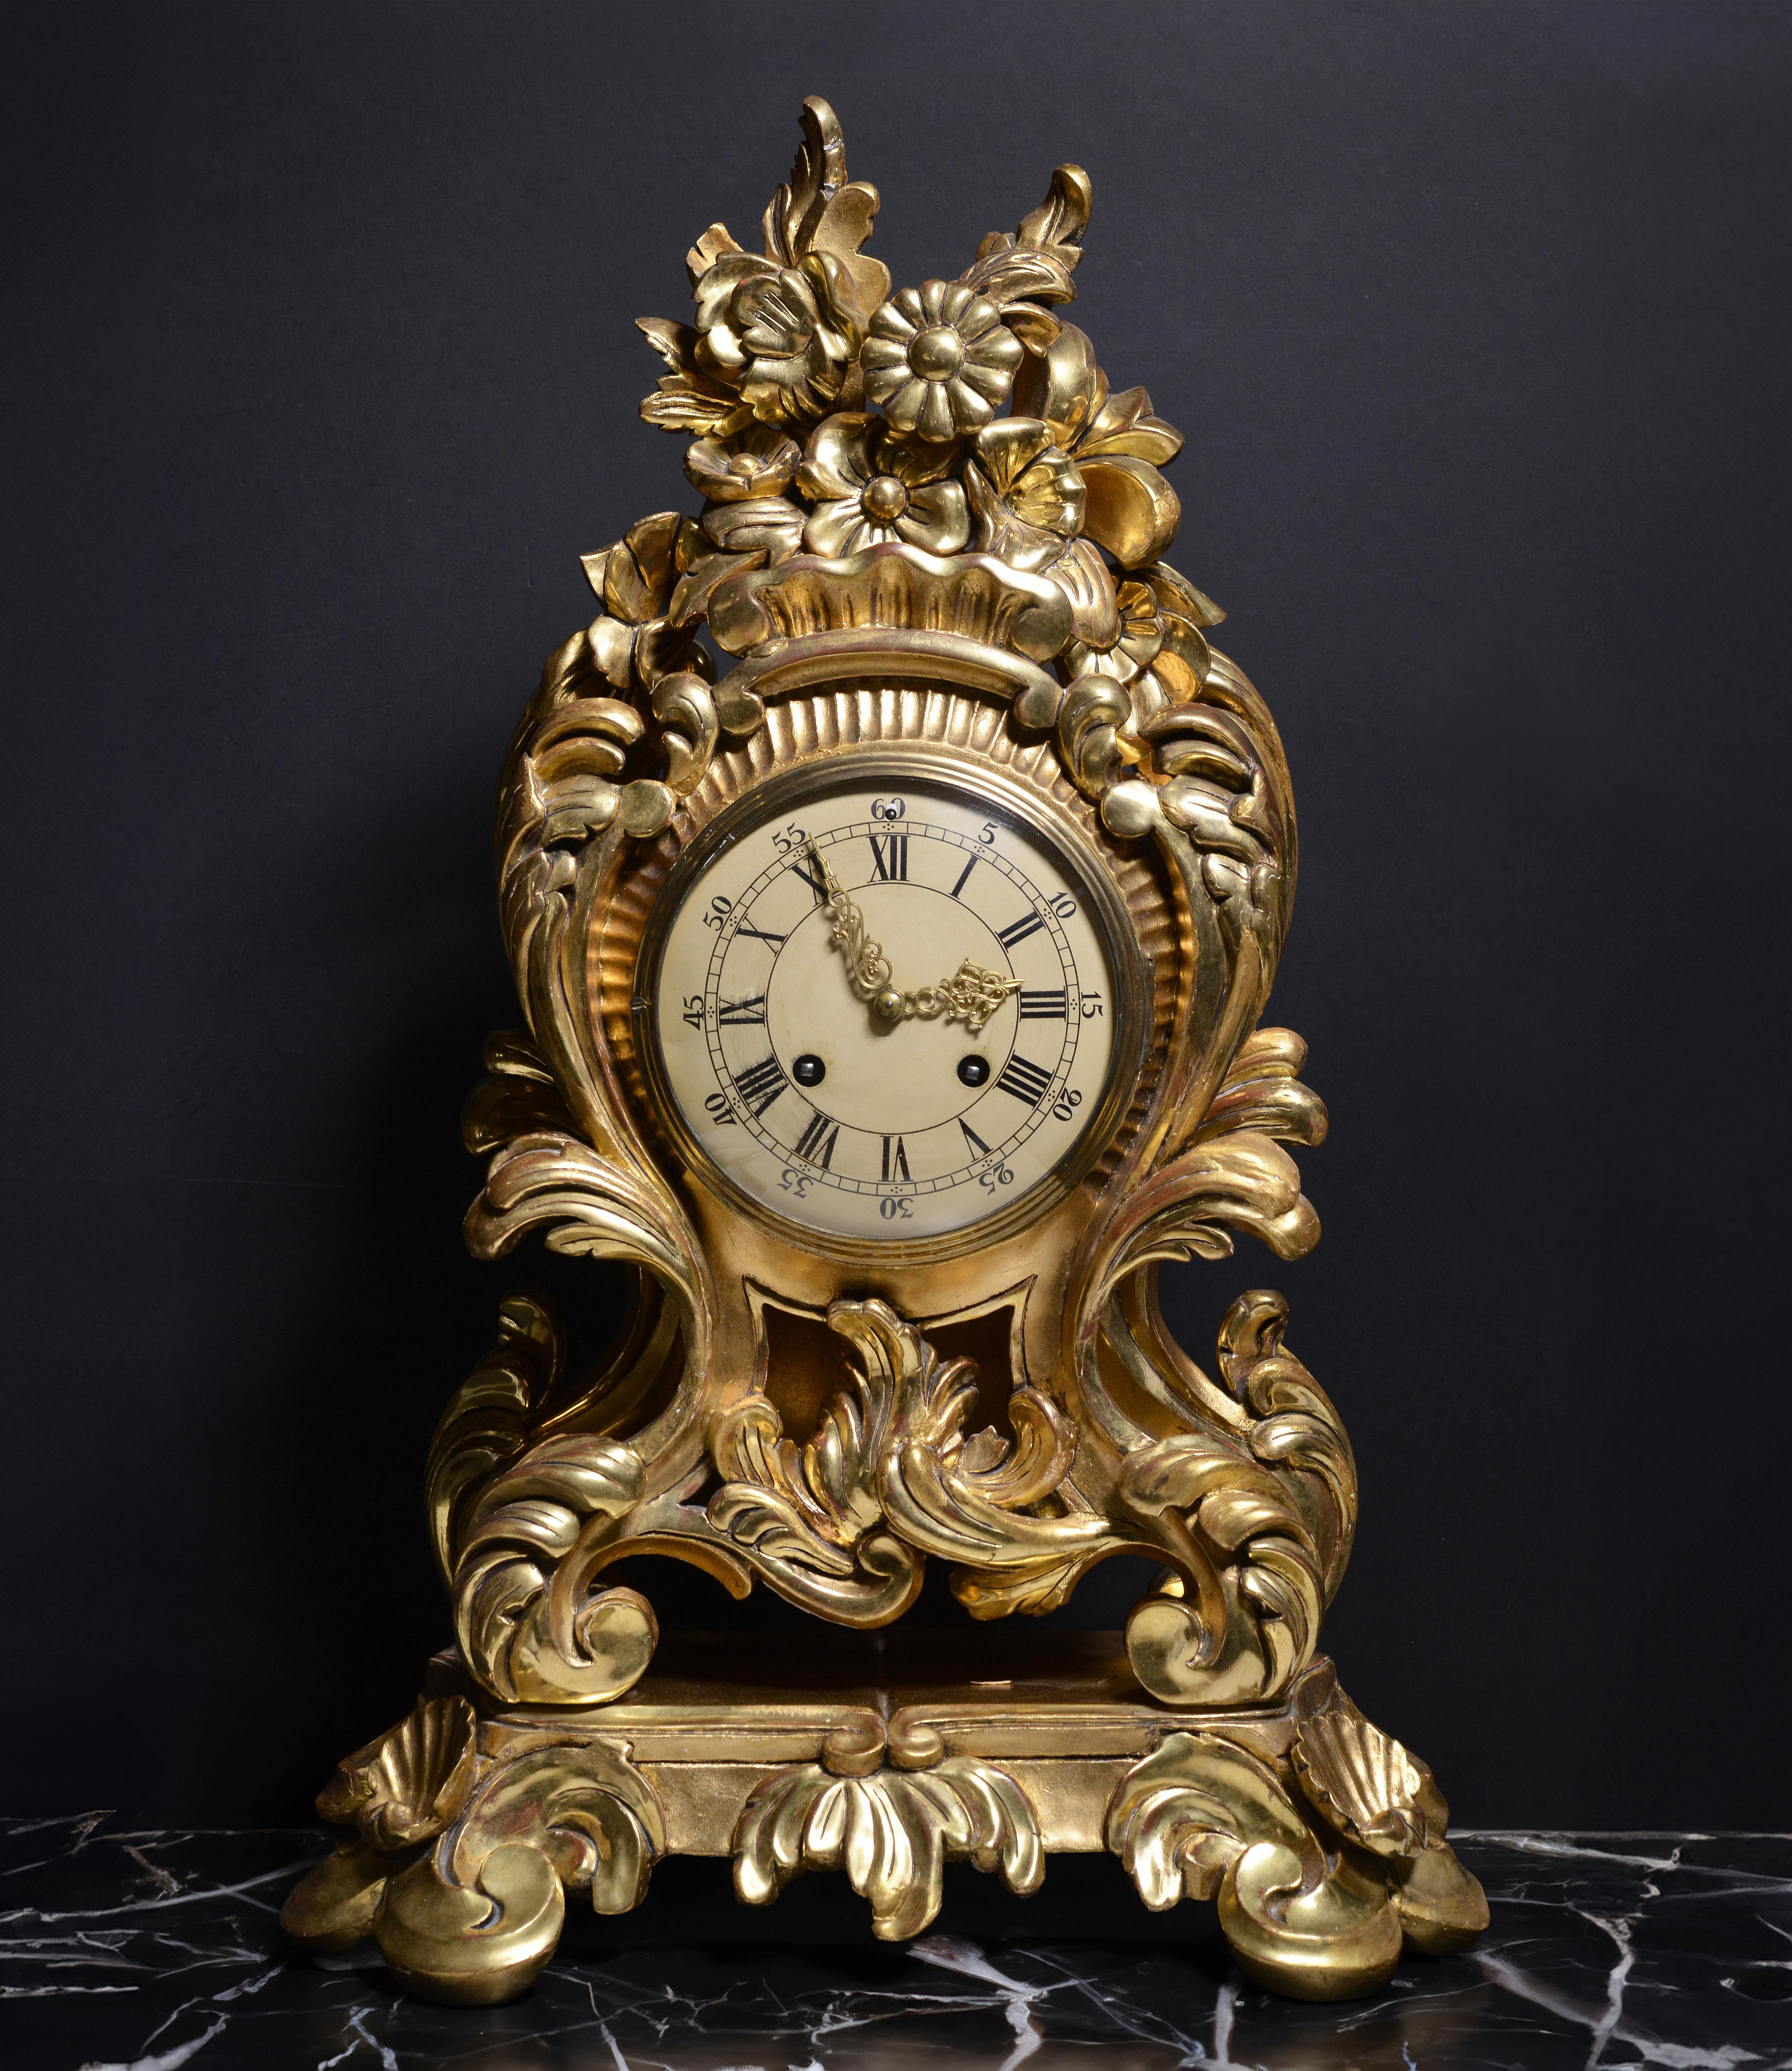 Gorgeous 25 inches (!) tall hand carved and gold leaf floral motive Rococo clock made in 1 copy ca 1950 by Westerstrand or Westerstrand Urfabrik Aktiebolag, one of Töreboda's oldest and best-known companies. This timeless clock is a gorgeous tribute